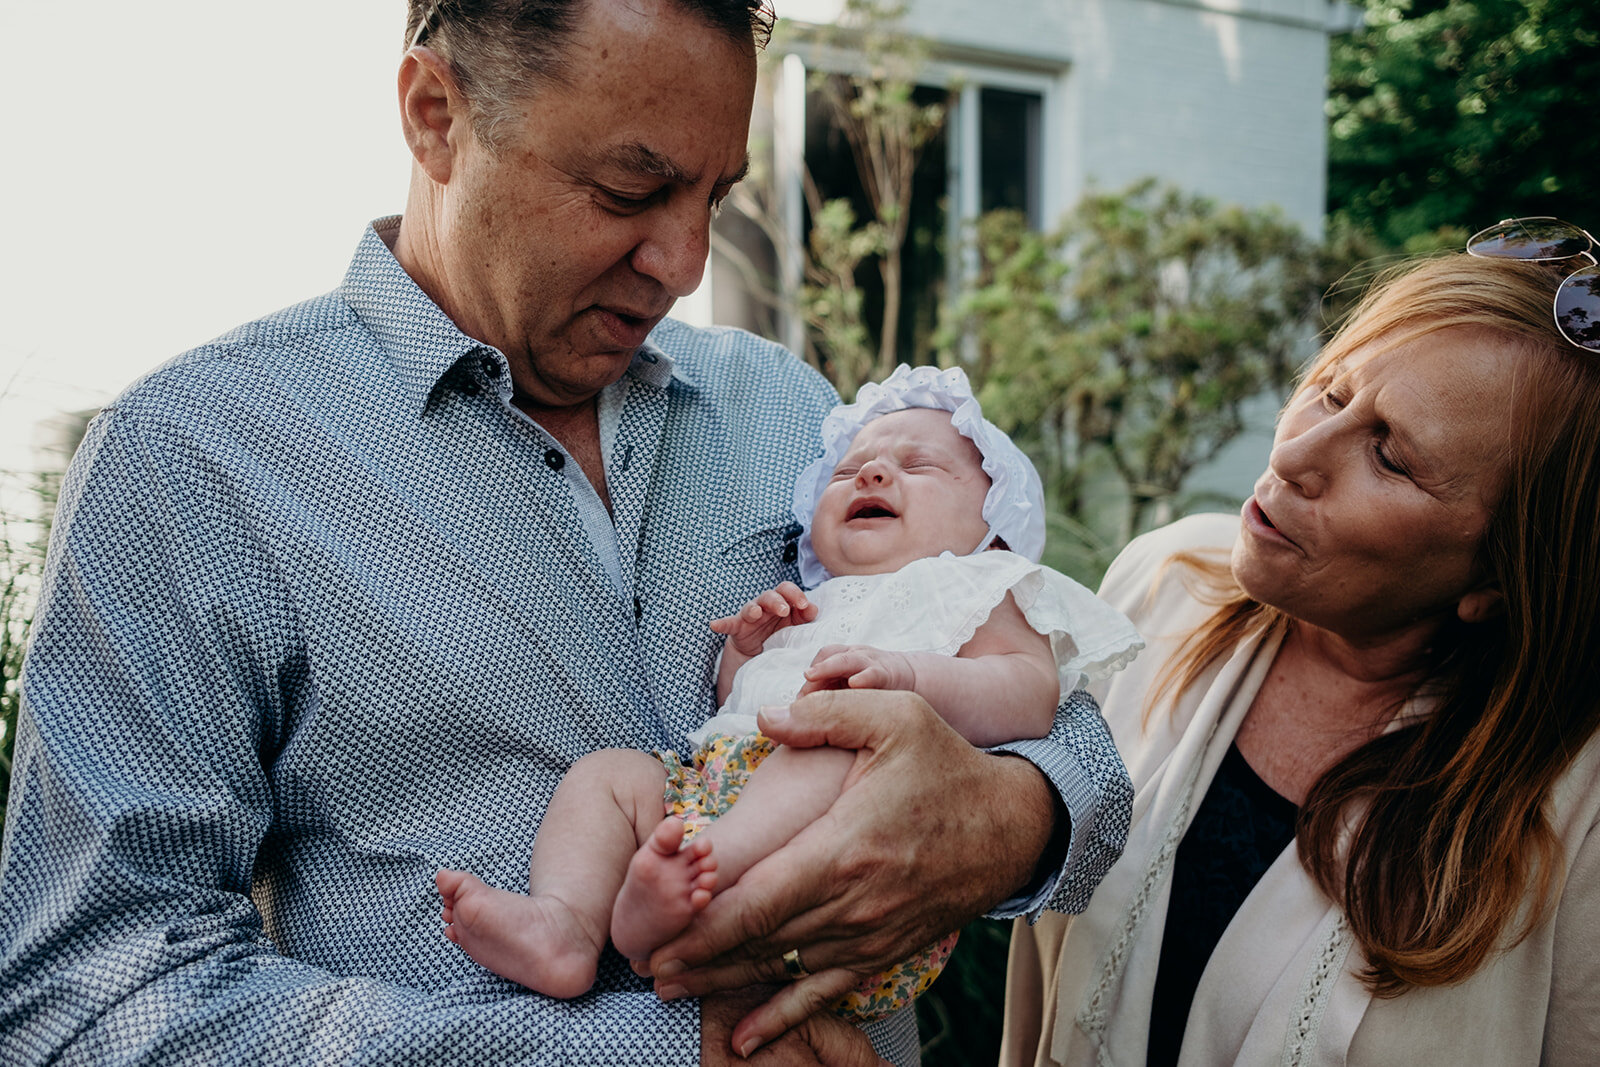 Grandparents try to calm their granddaughter during a Jewish baby naming ceremony.